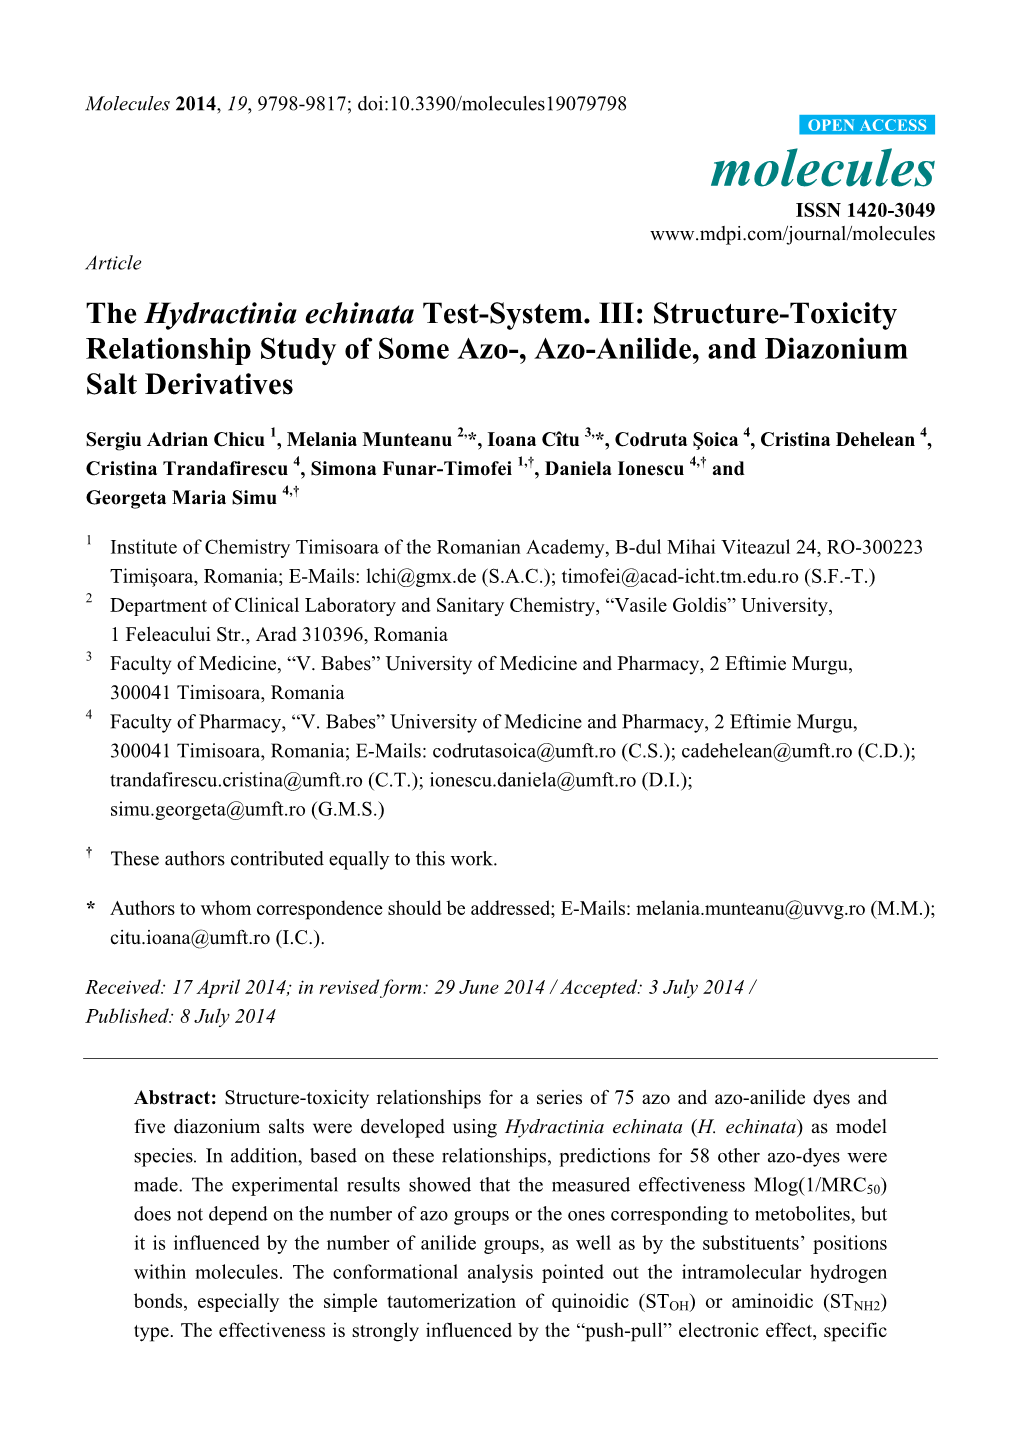 The Hydractinia Echinata Test-System. III: Structure-Toxicity Relationship Study of Some Azo-, Azo-Anilide, and Diazonium Salt Derivatives